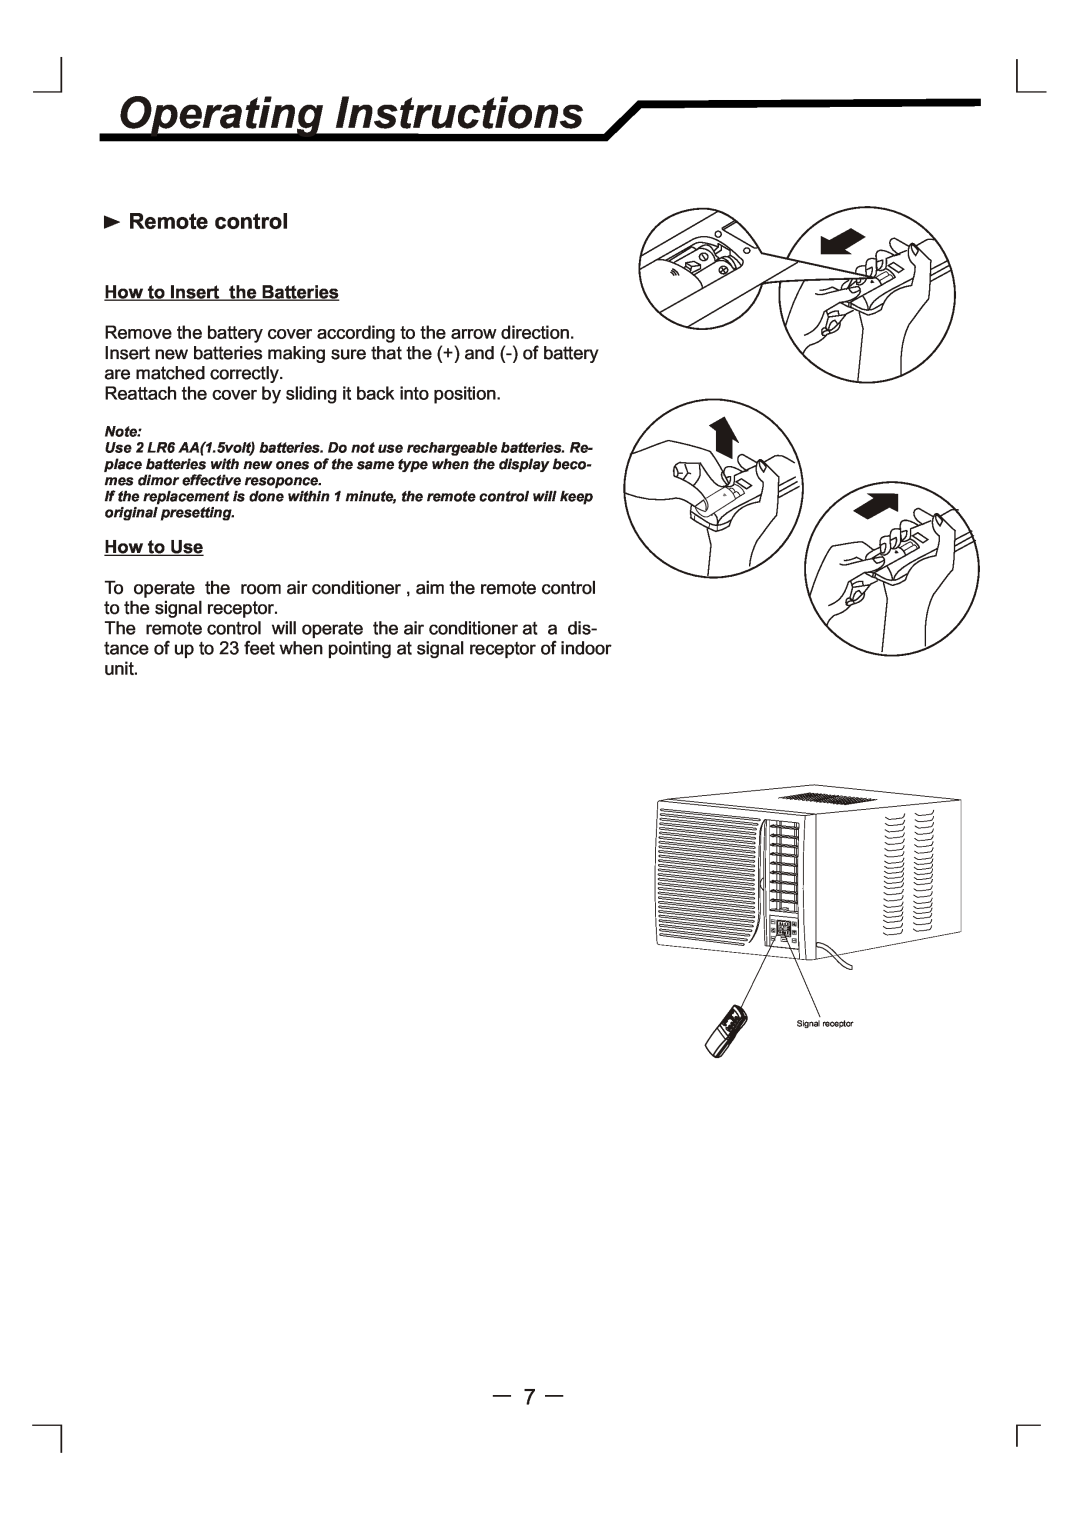 NEC RWC-3217, RWC-4717 user manual Operating Instructions, Remote control, How to Insert the Batteries, How to Use 